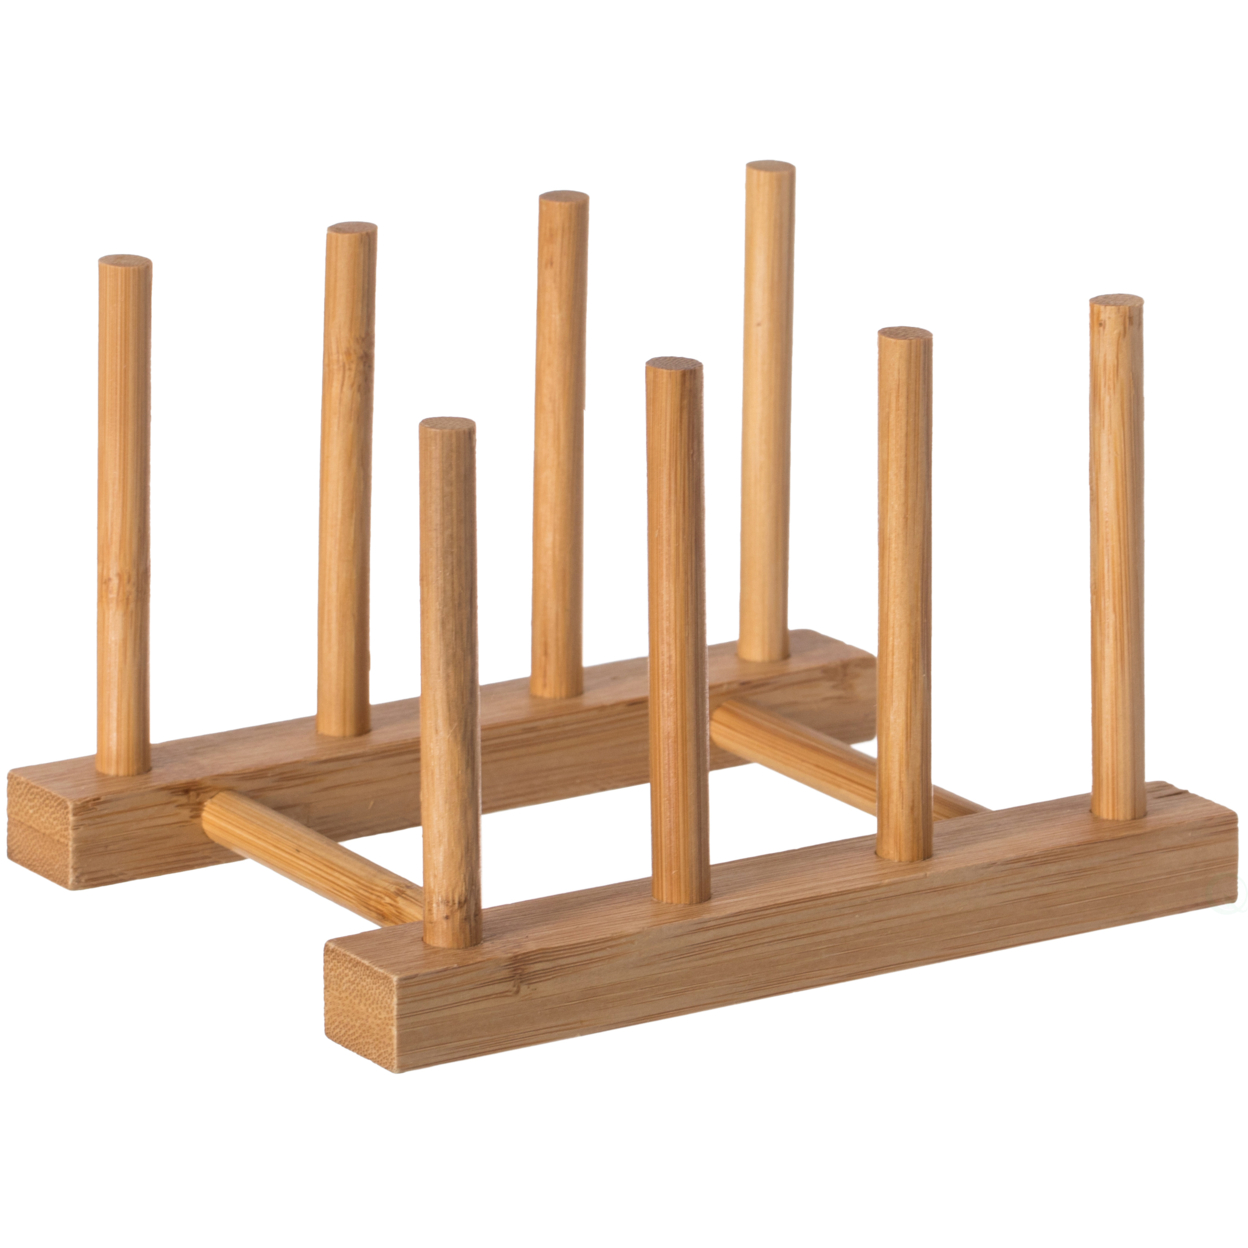 Set Of 2 Bamboo Wooden Dish Drainer Rack, Plate Rack, And Drying Drainer - 3 Grid